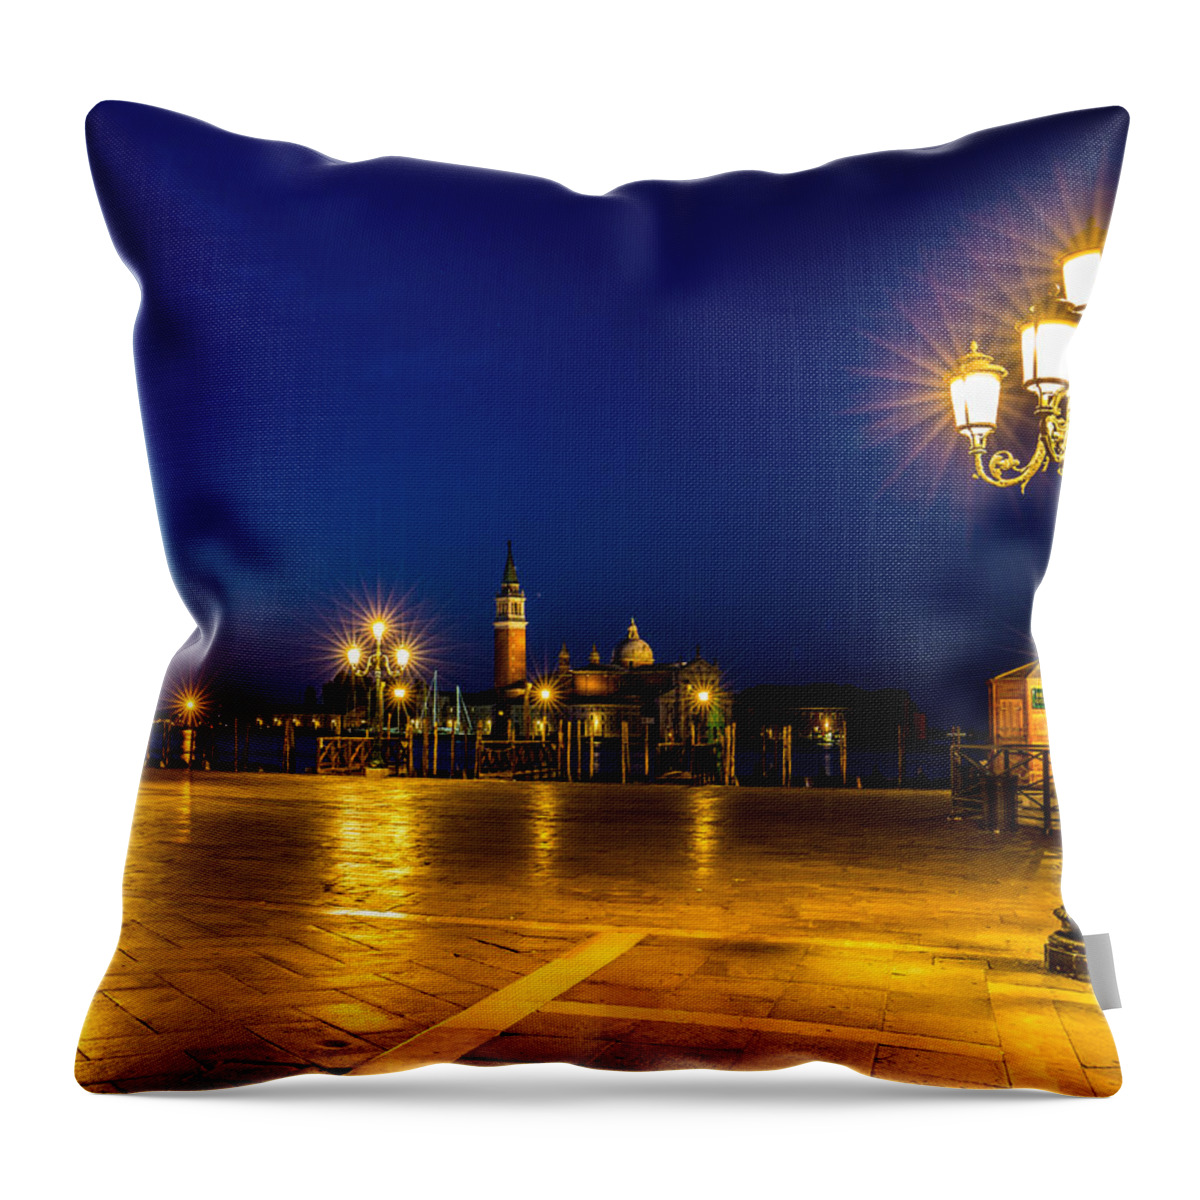 Sunrise Throw Pillow featuring the photograph San Marco Square in Venice at Sunrise by Lev Kaytsner